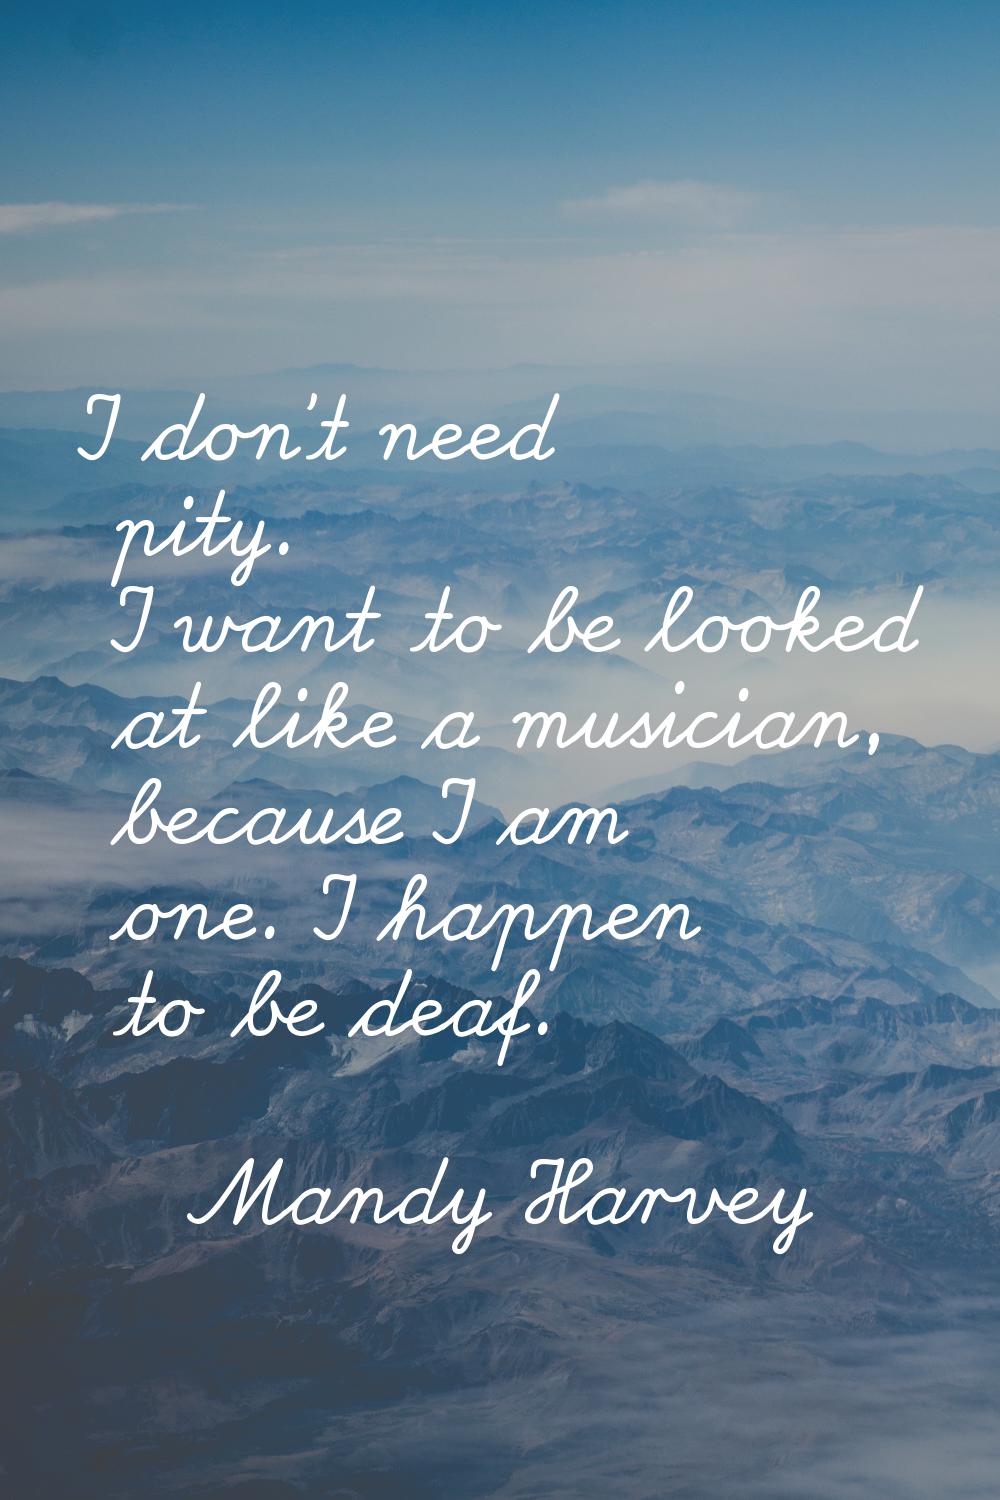 I don't need pity. I want to be looked at like a musician, because I am one. I happen to be deaf.